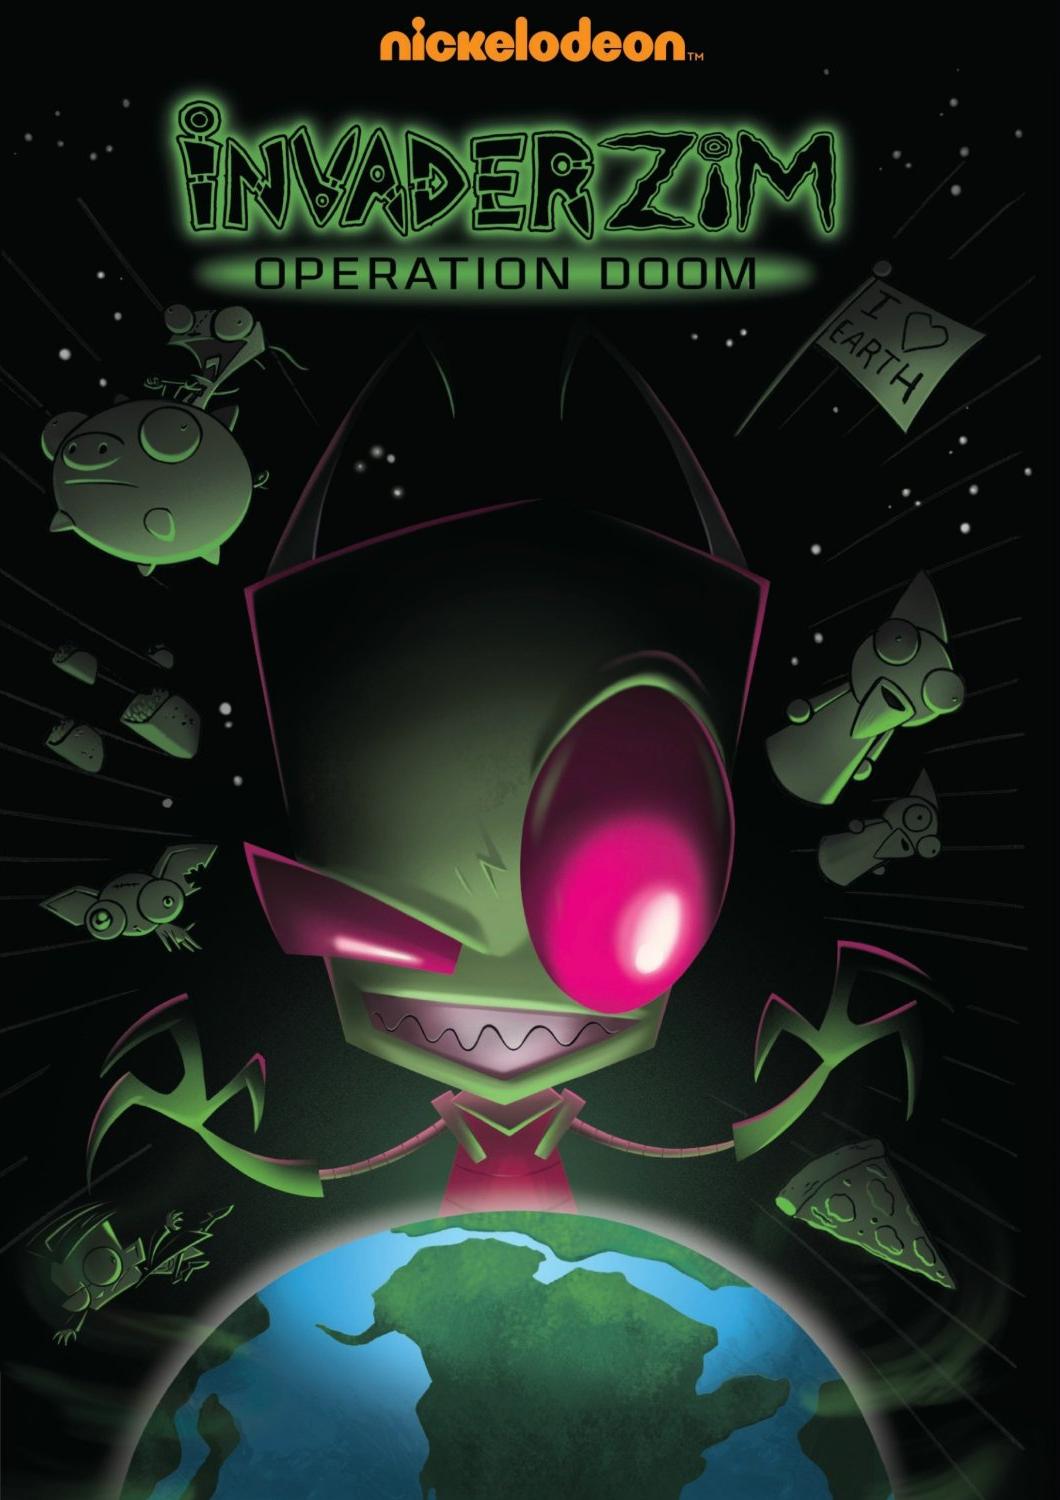 Invader Zim videography | Nickelodeon | FANDOM powered by Wikia1060 x 1500